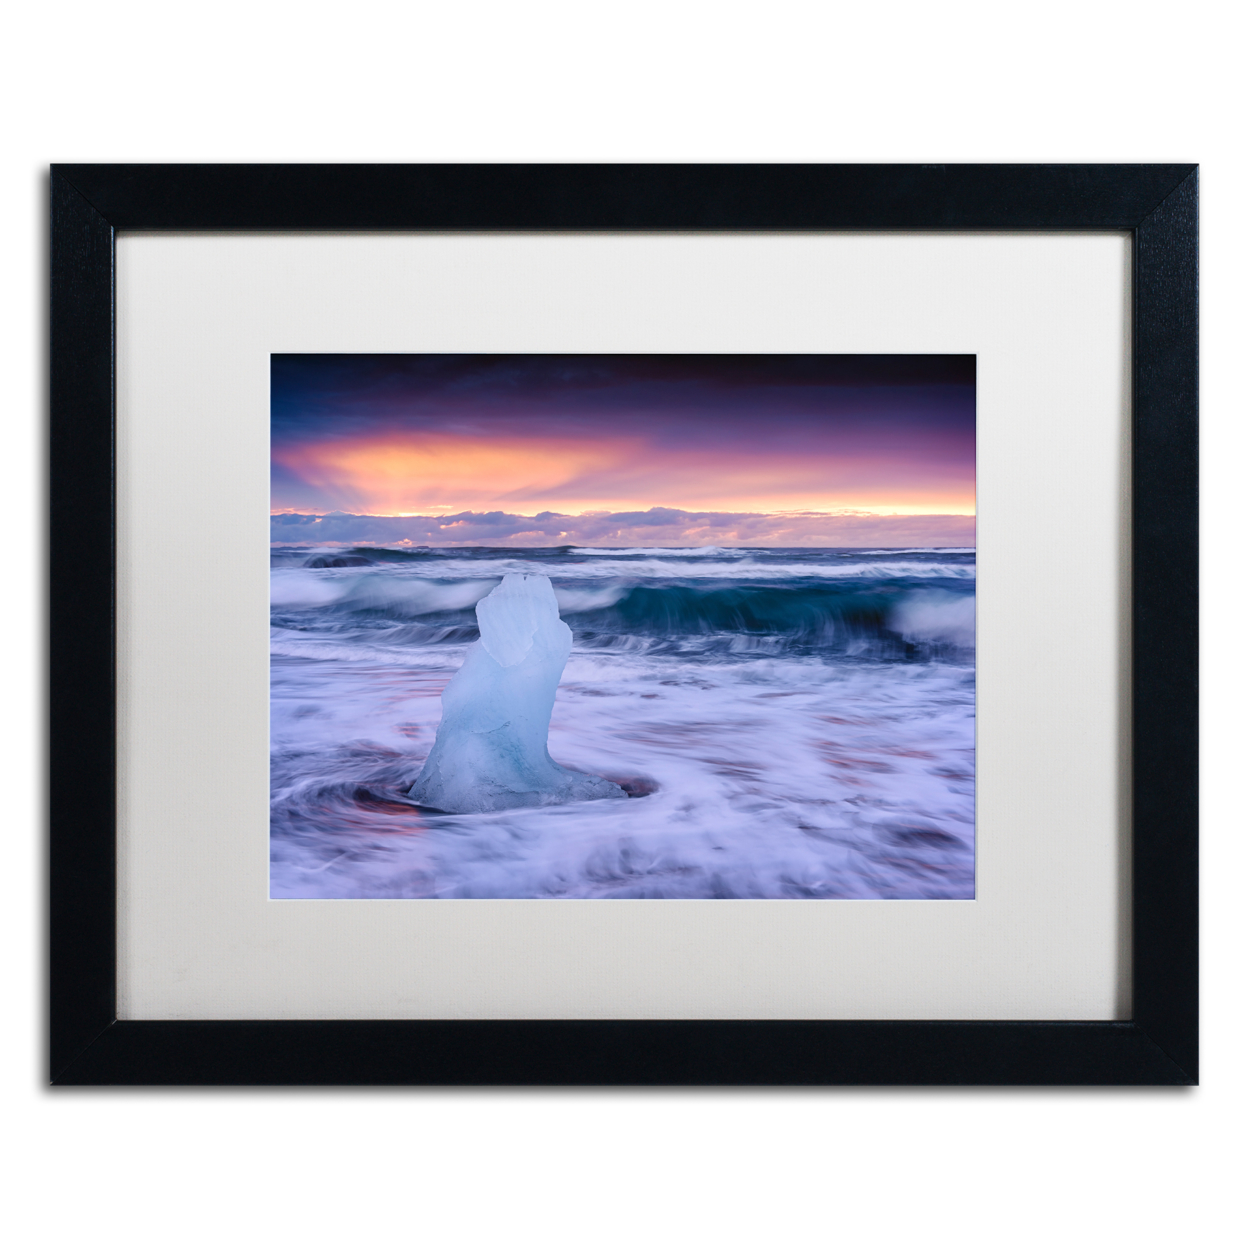 Michael Blanchette Photography 'Ice Sculpture' Black Wooden Framed Art 18 X 22 Inches